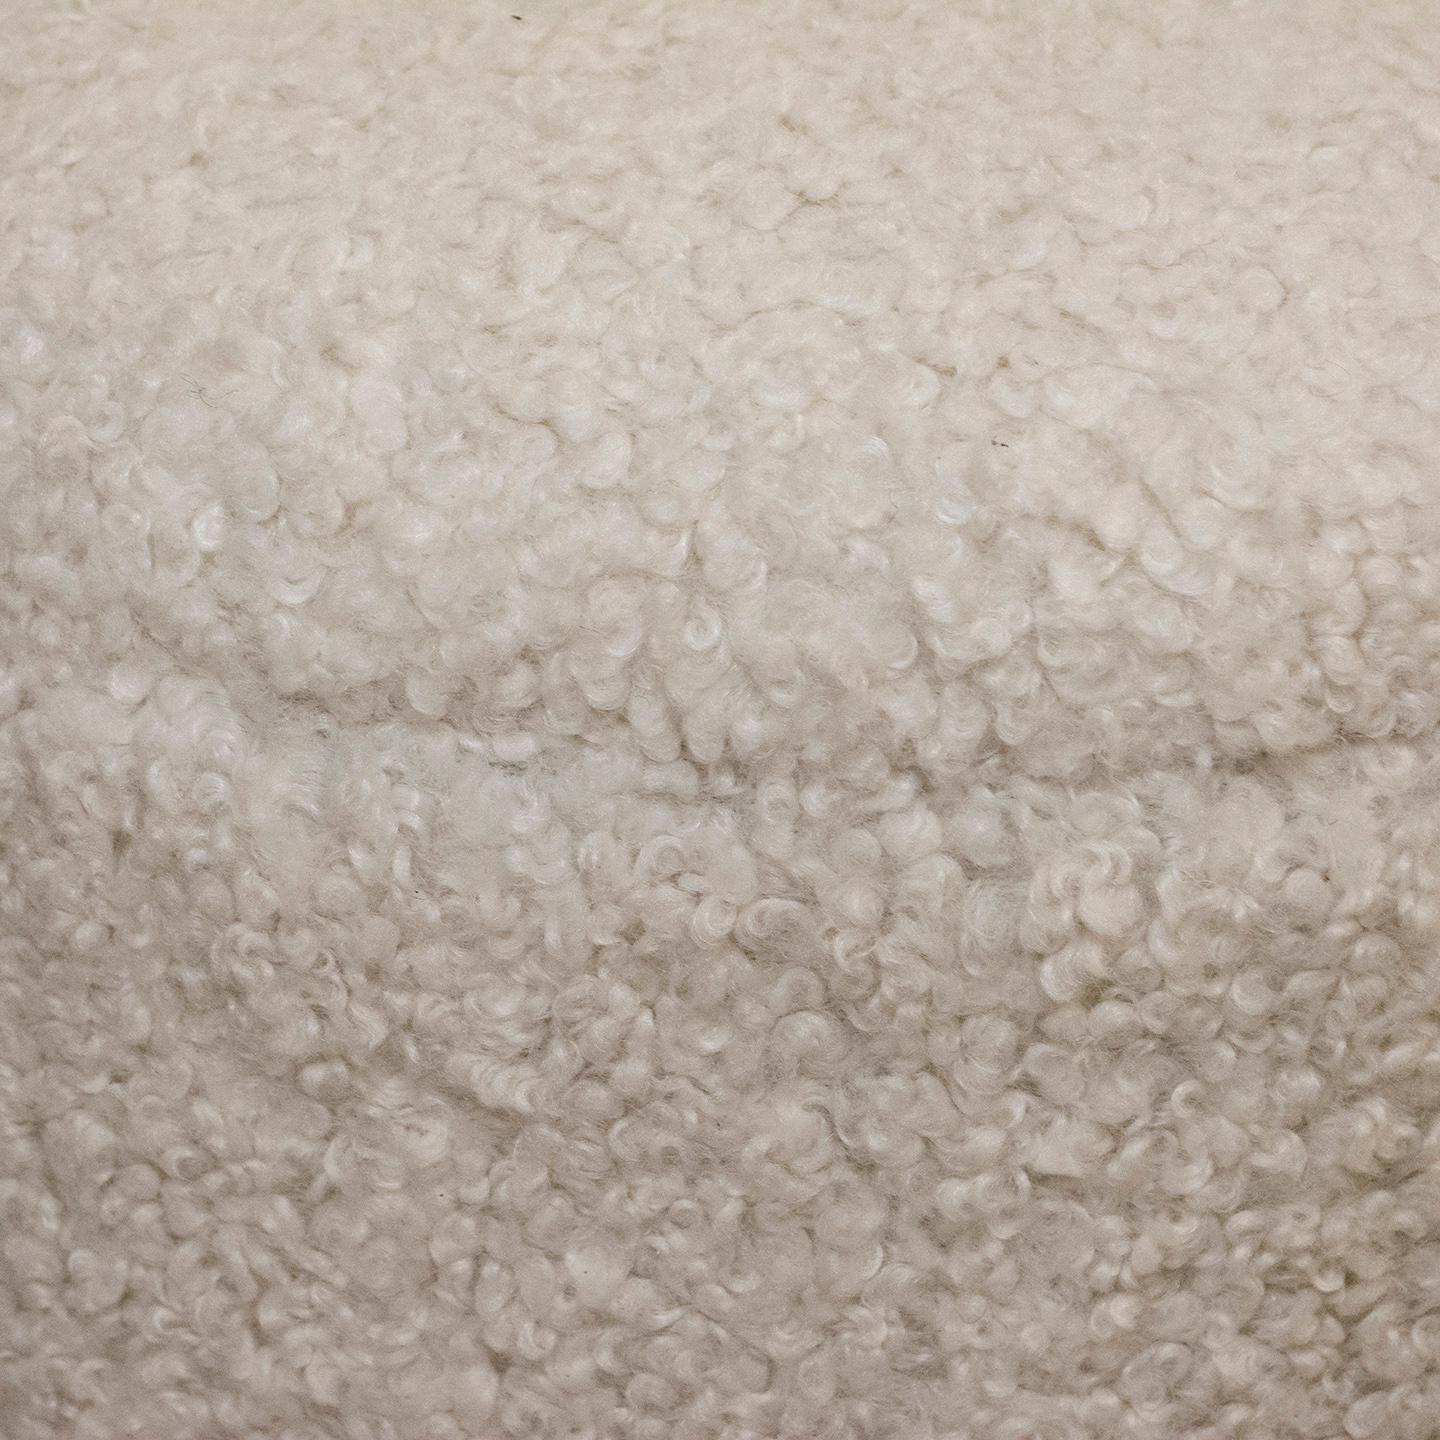 1980s pouf with brand new upholstery in contemporary faux shearling fabric. The pouf was reupholstered to meet today's desired level of comfort. This pouf would look terrific in a living room, family room, library, and anywhere someone may need